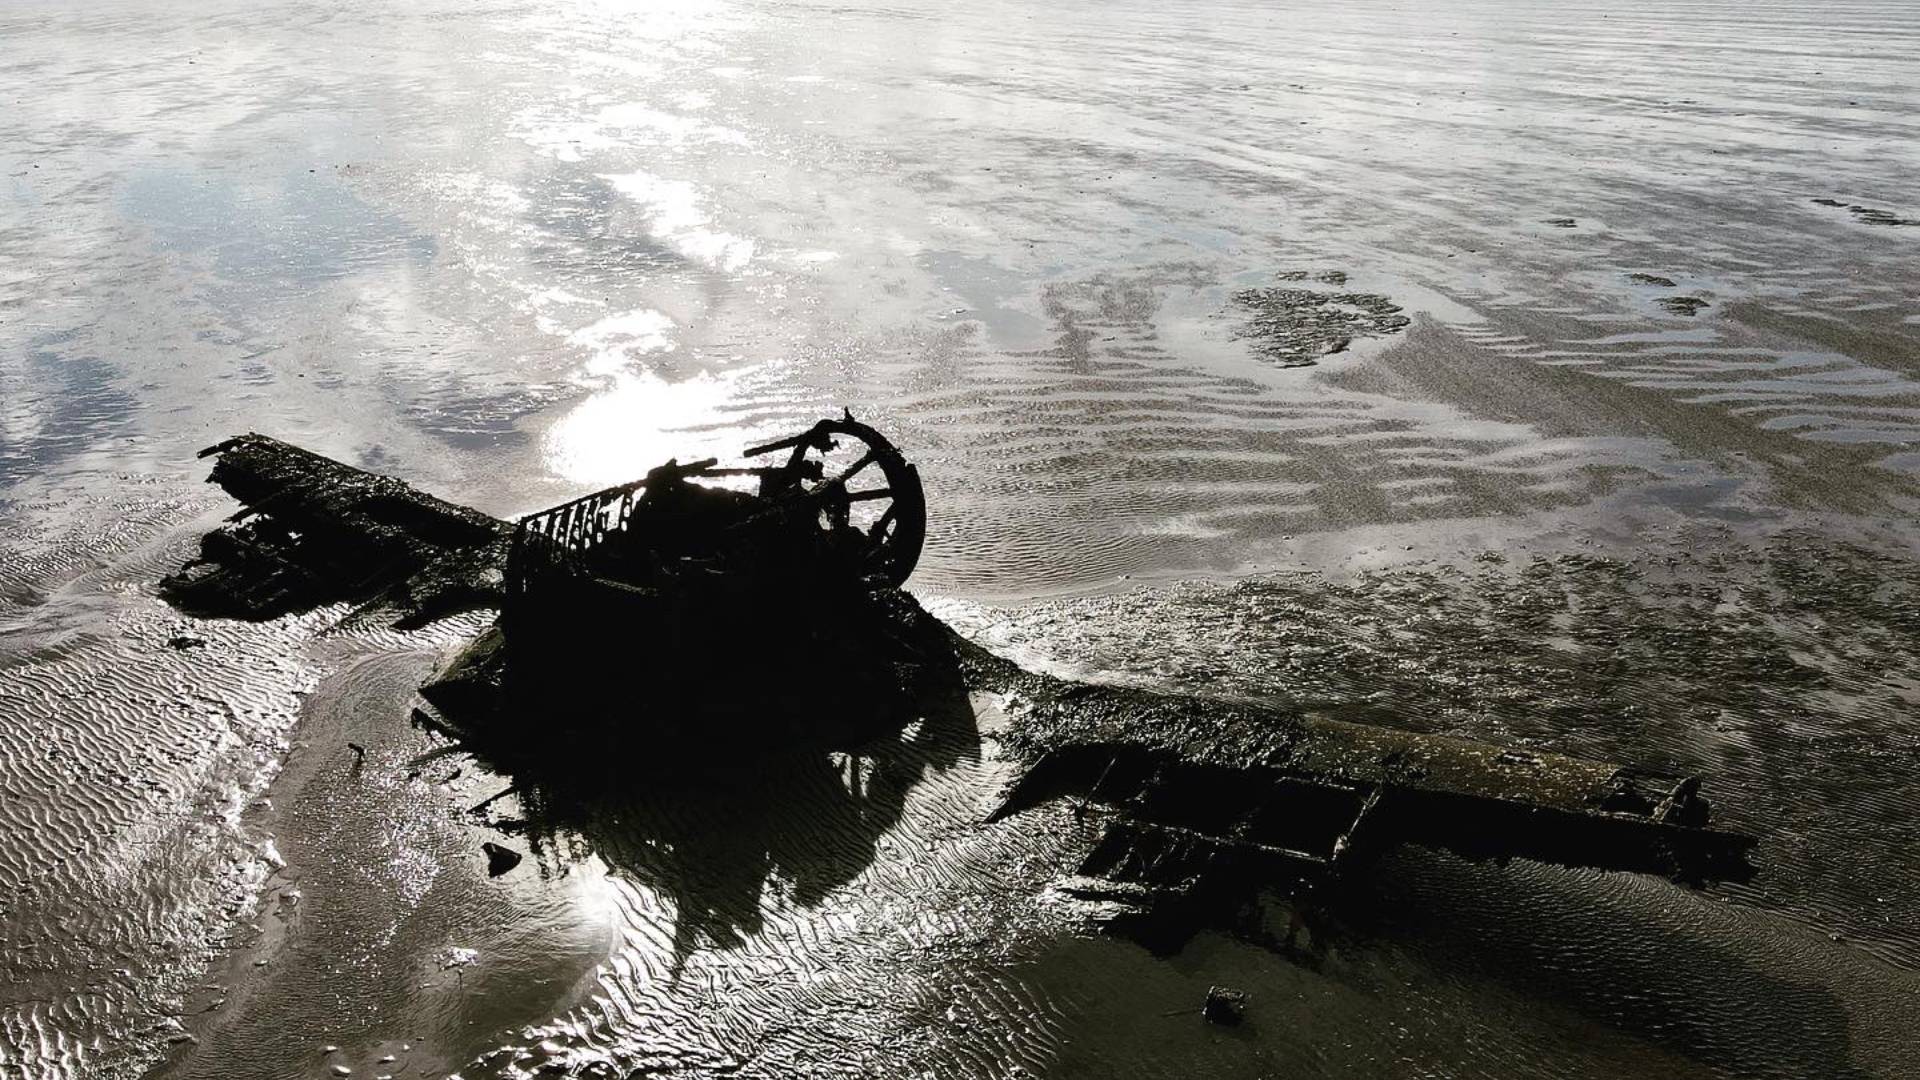 Wreckage of Vought F4U-1 Corsair R JT693 on the mudflats in Lough Foyle off the coast at Ballykelly, Co. Londonderry.